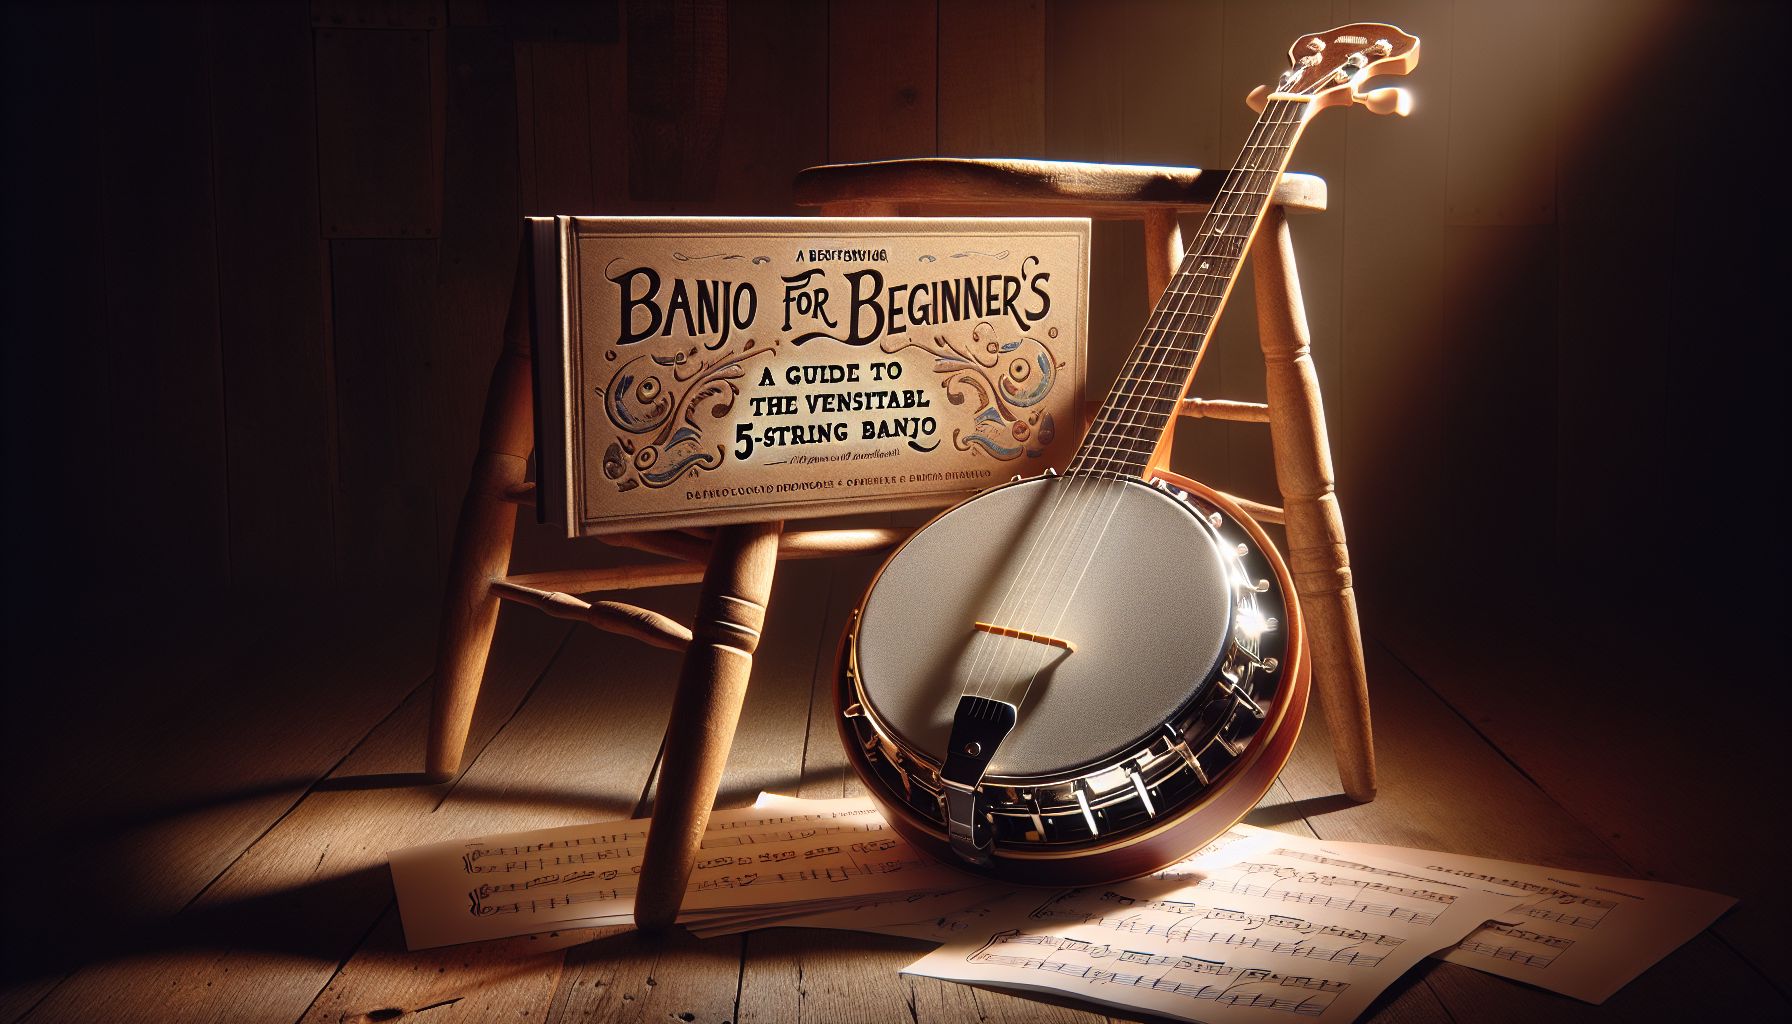 Banjo for Beginners: A Guide to the Versatile 5-String Banjo